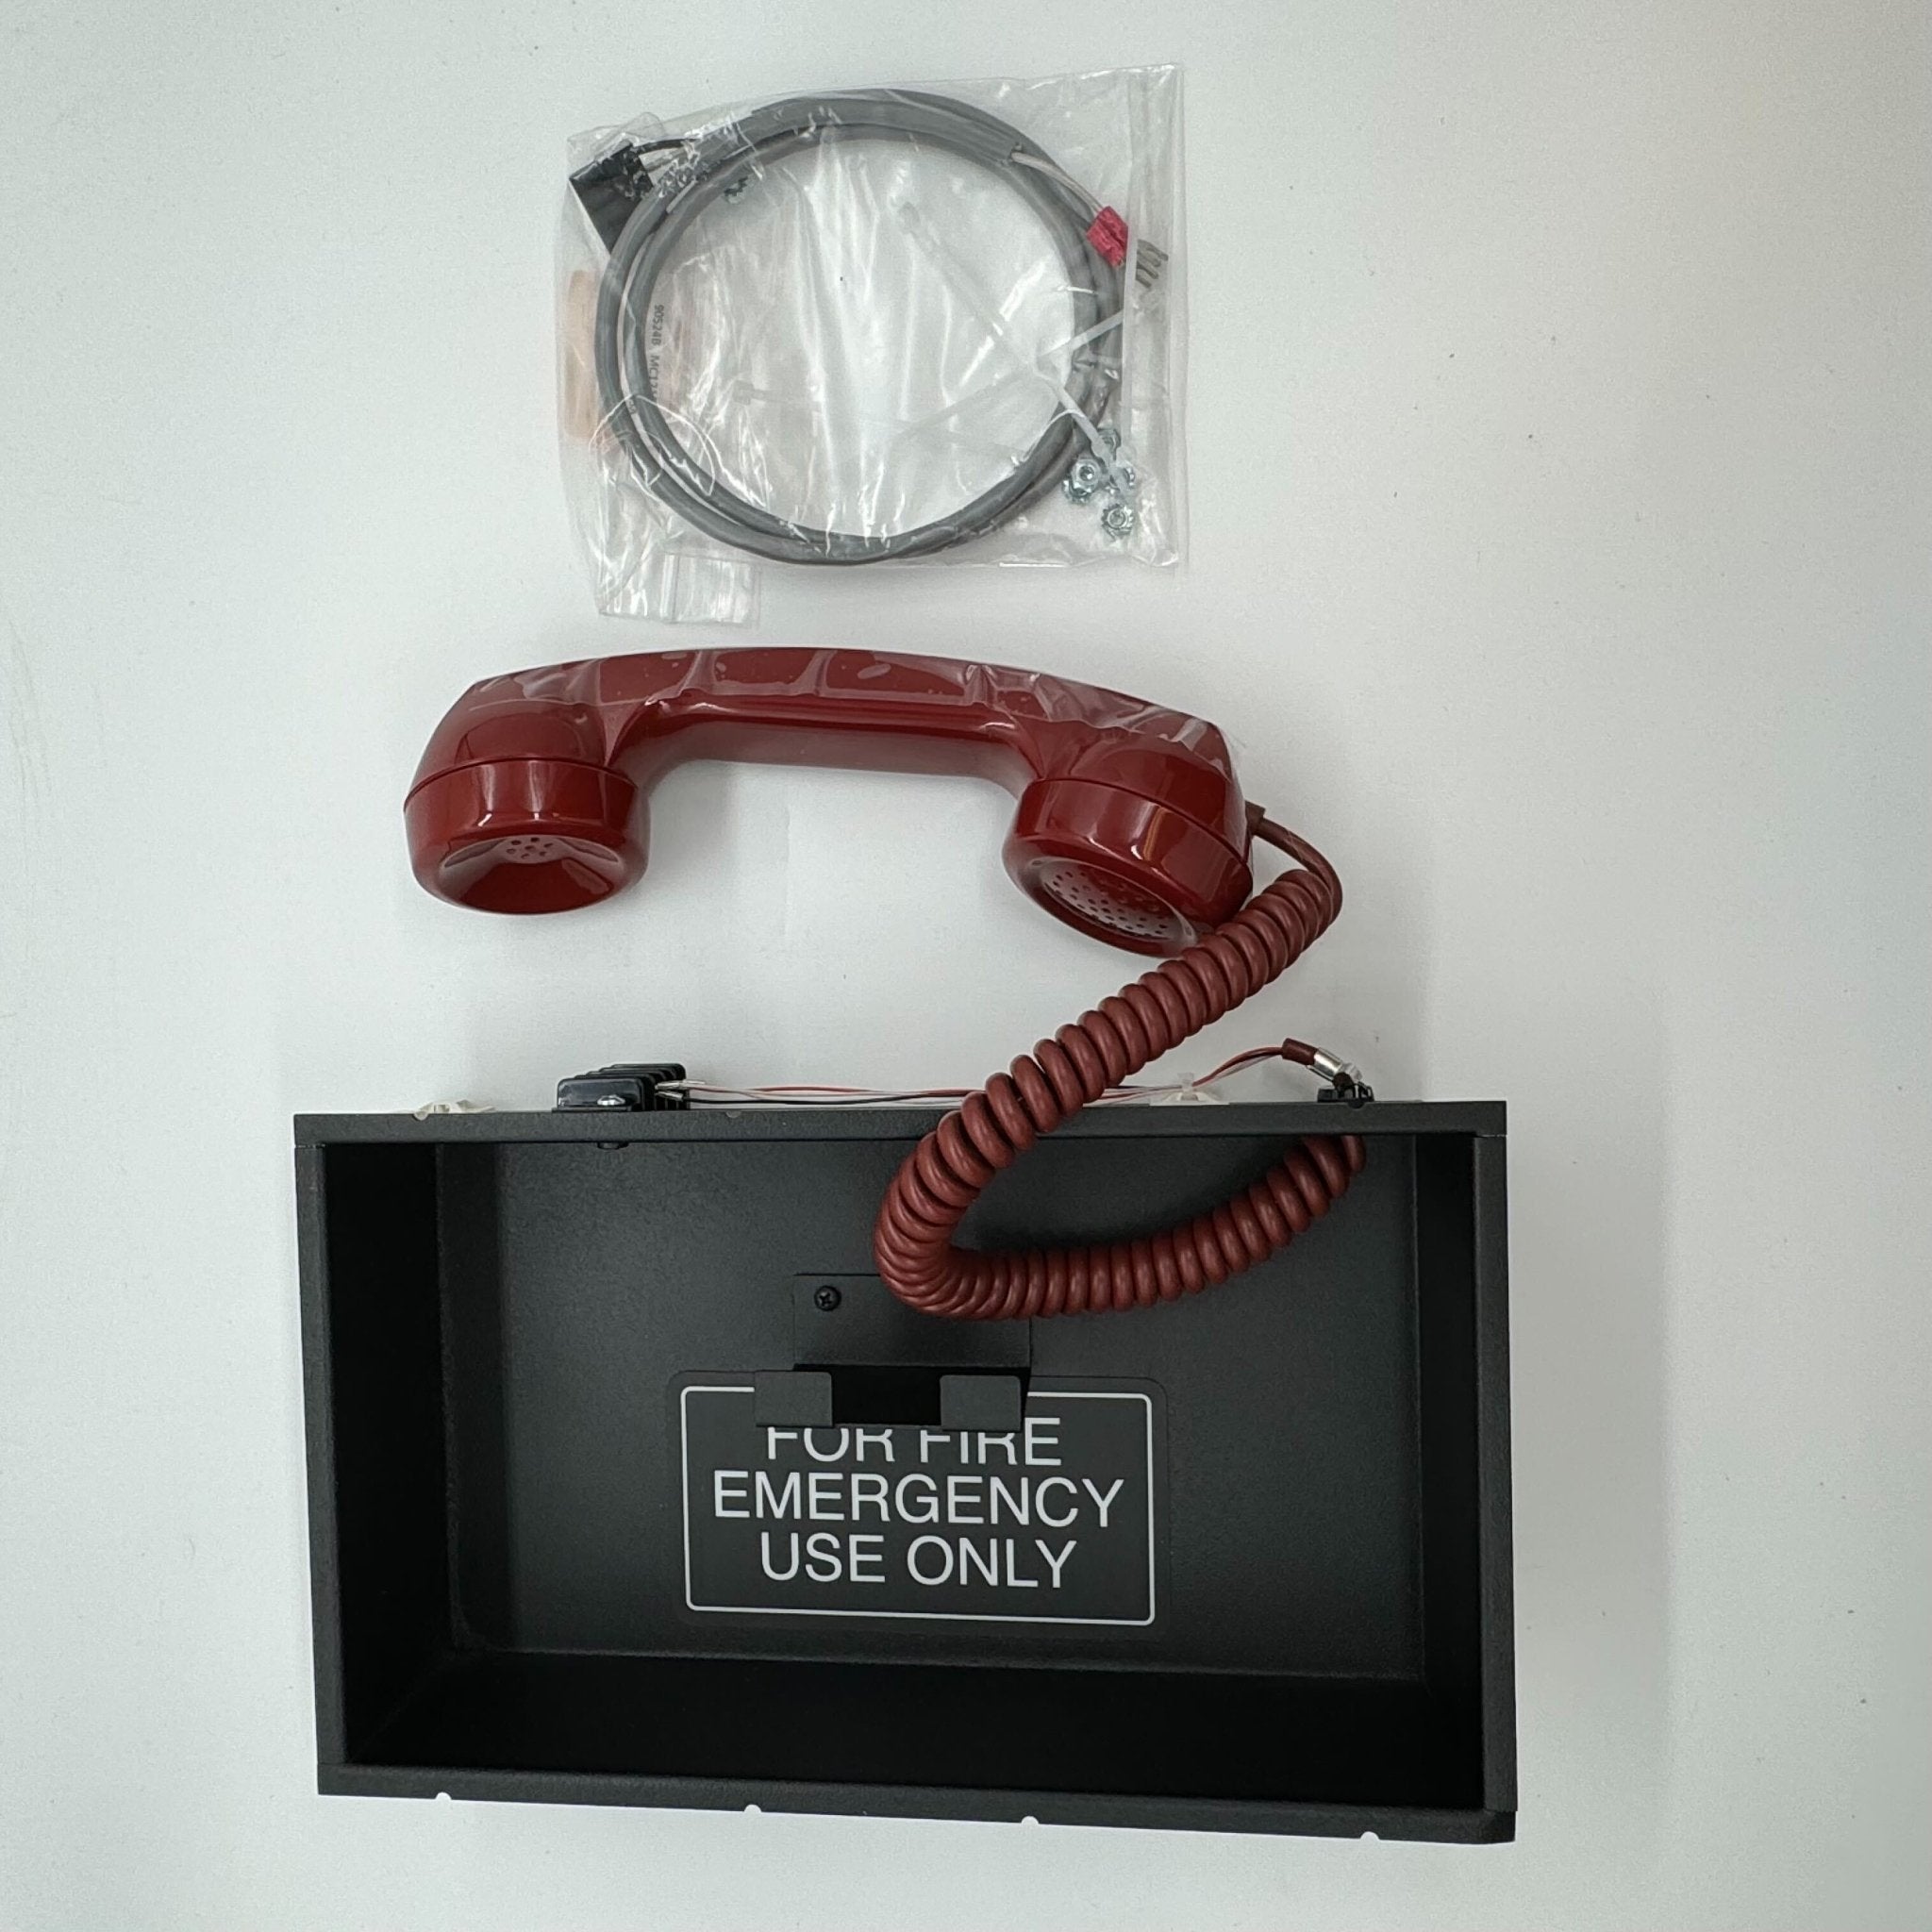 1100-0451 - The Fire Alarm Supplier